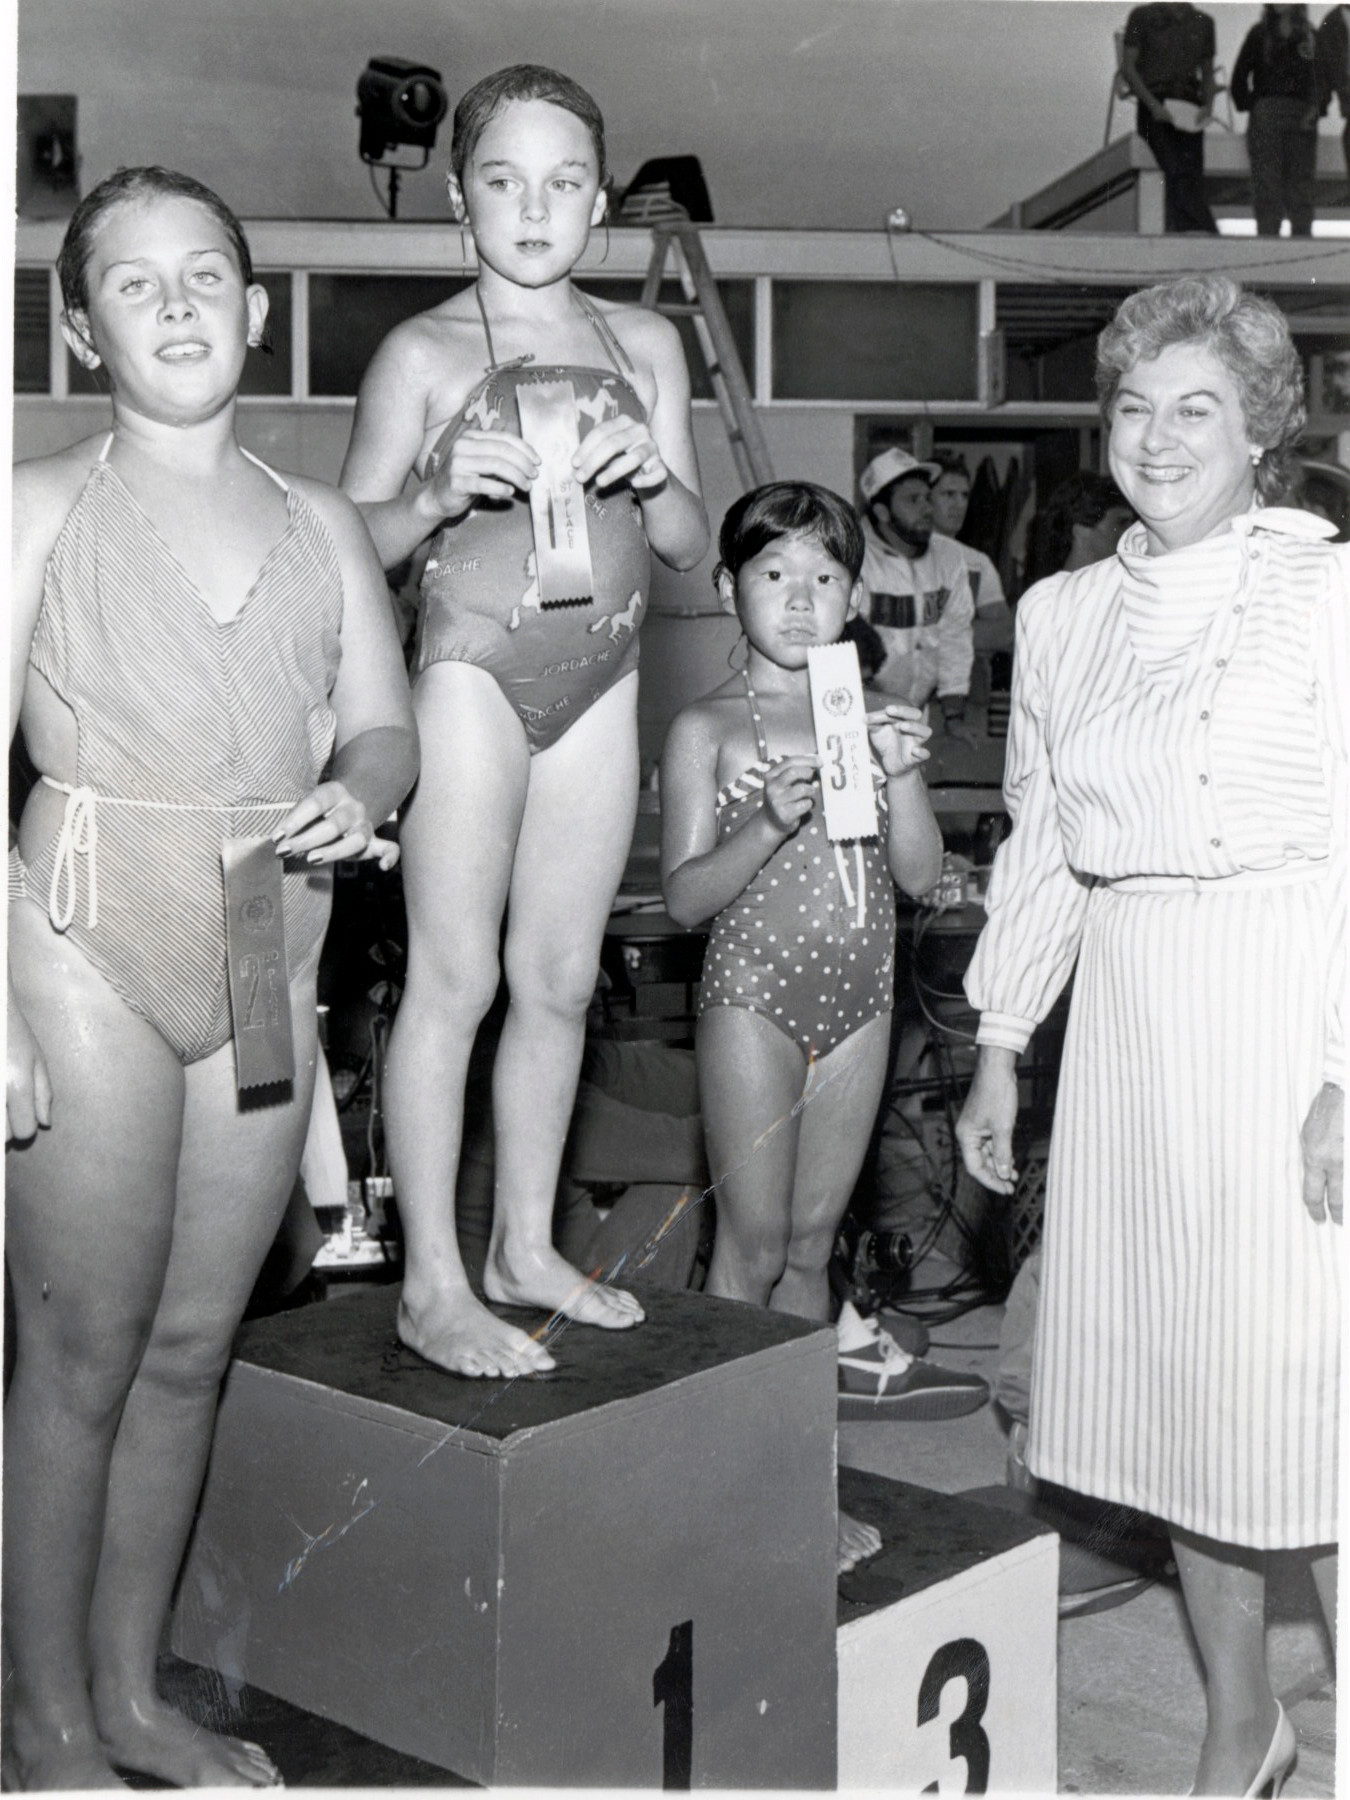 Rosanna Clavin, right, a board member from 1983-91, handed out awards one year to swim team members at the village pool.